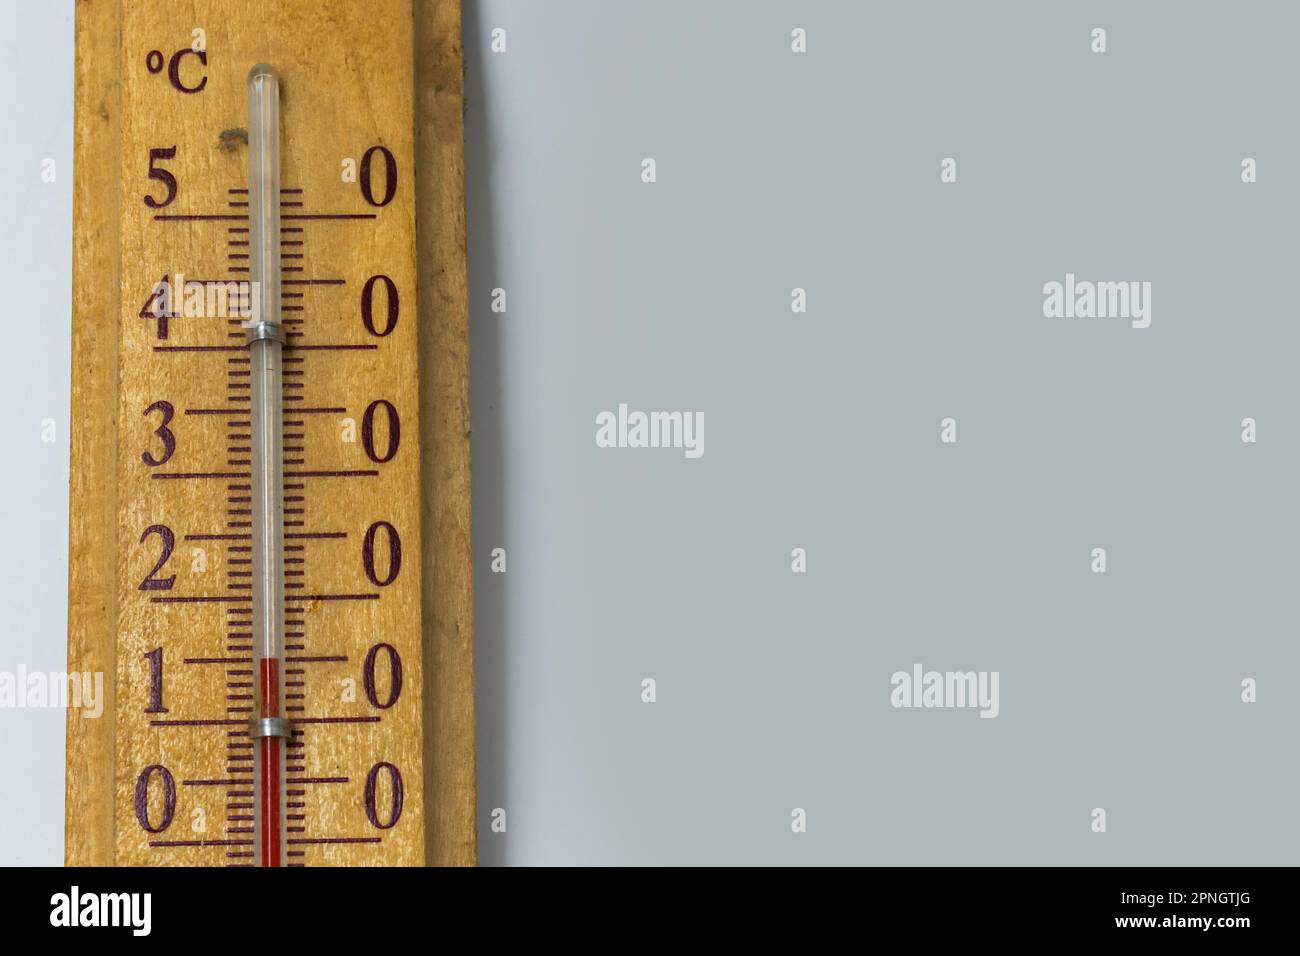 https://c8.alamy.com/comp/2PNGTJG/room-thermometer-on-a-wooden-base-close-up-on-a-white-background-celsius-degree-scale-2PNGTJG.jpg